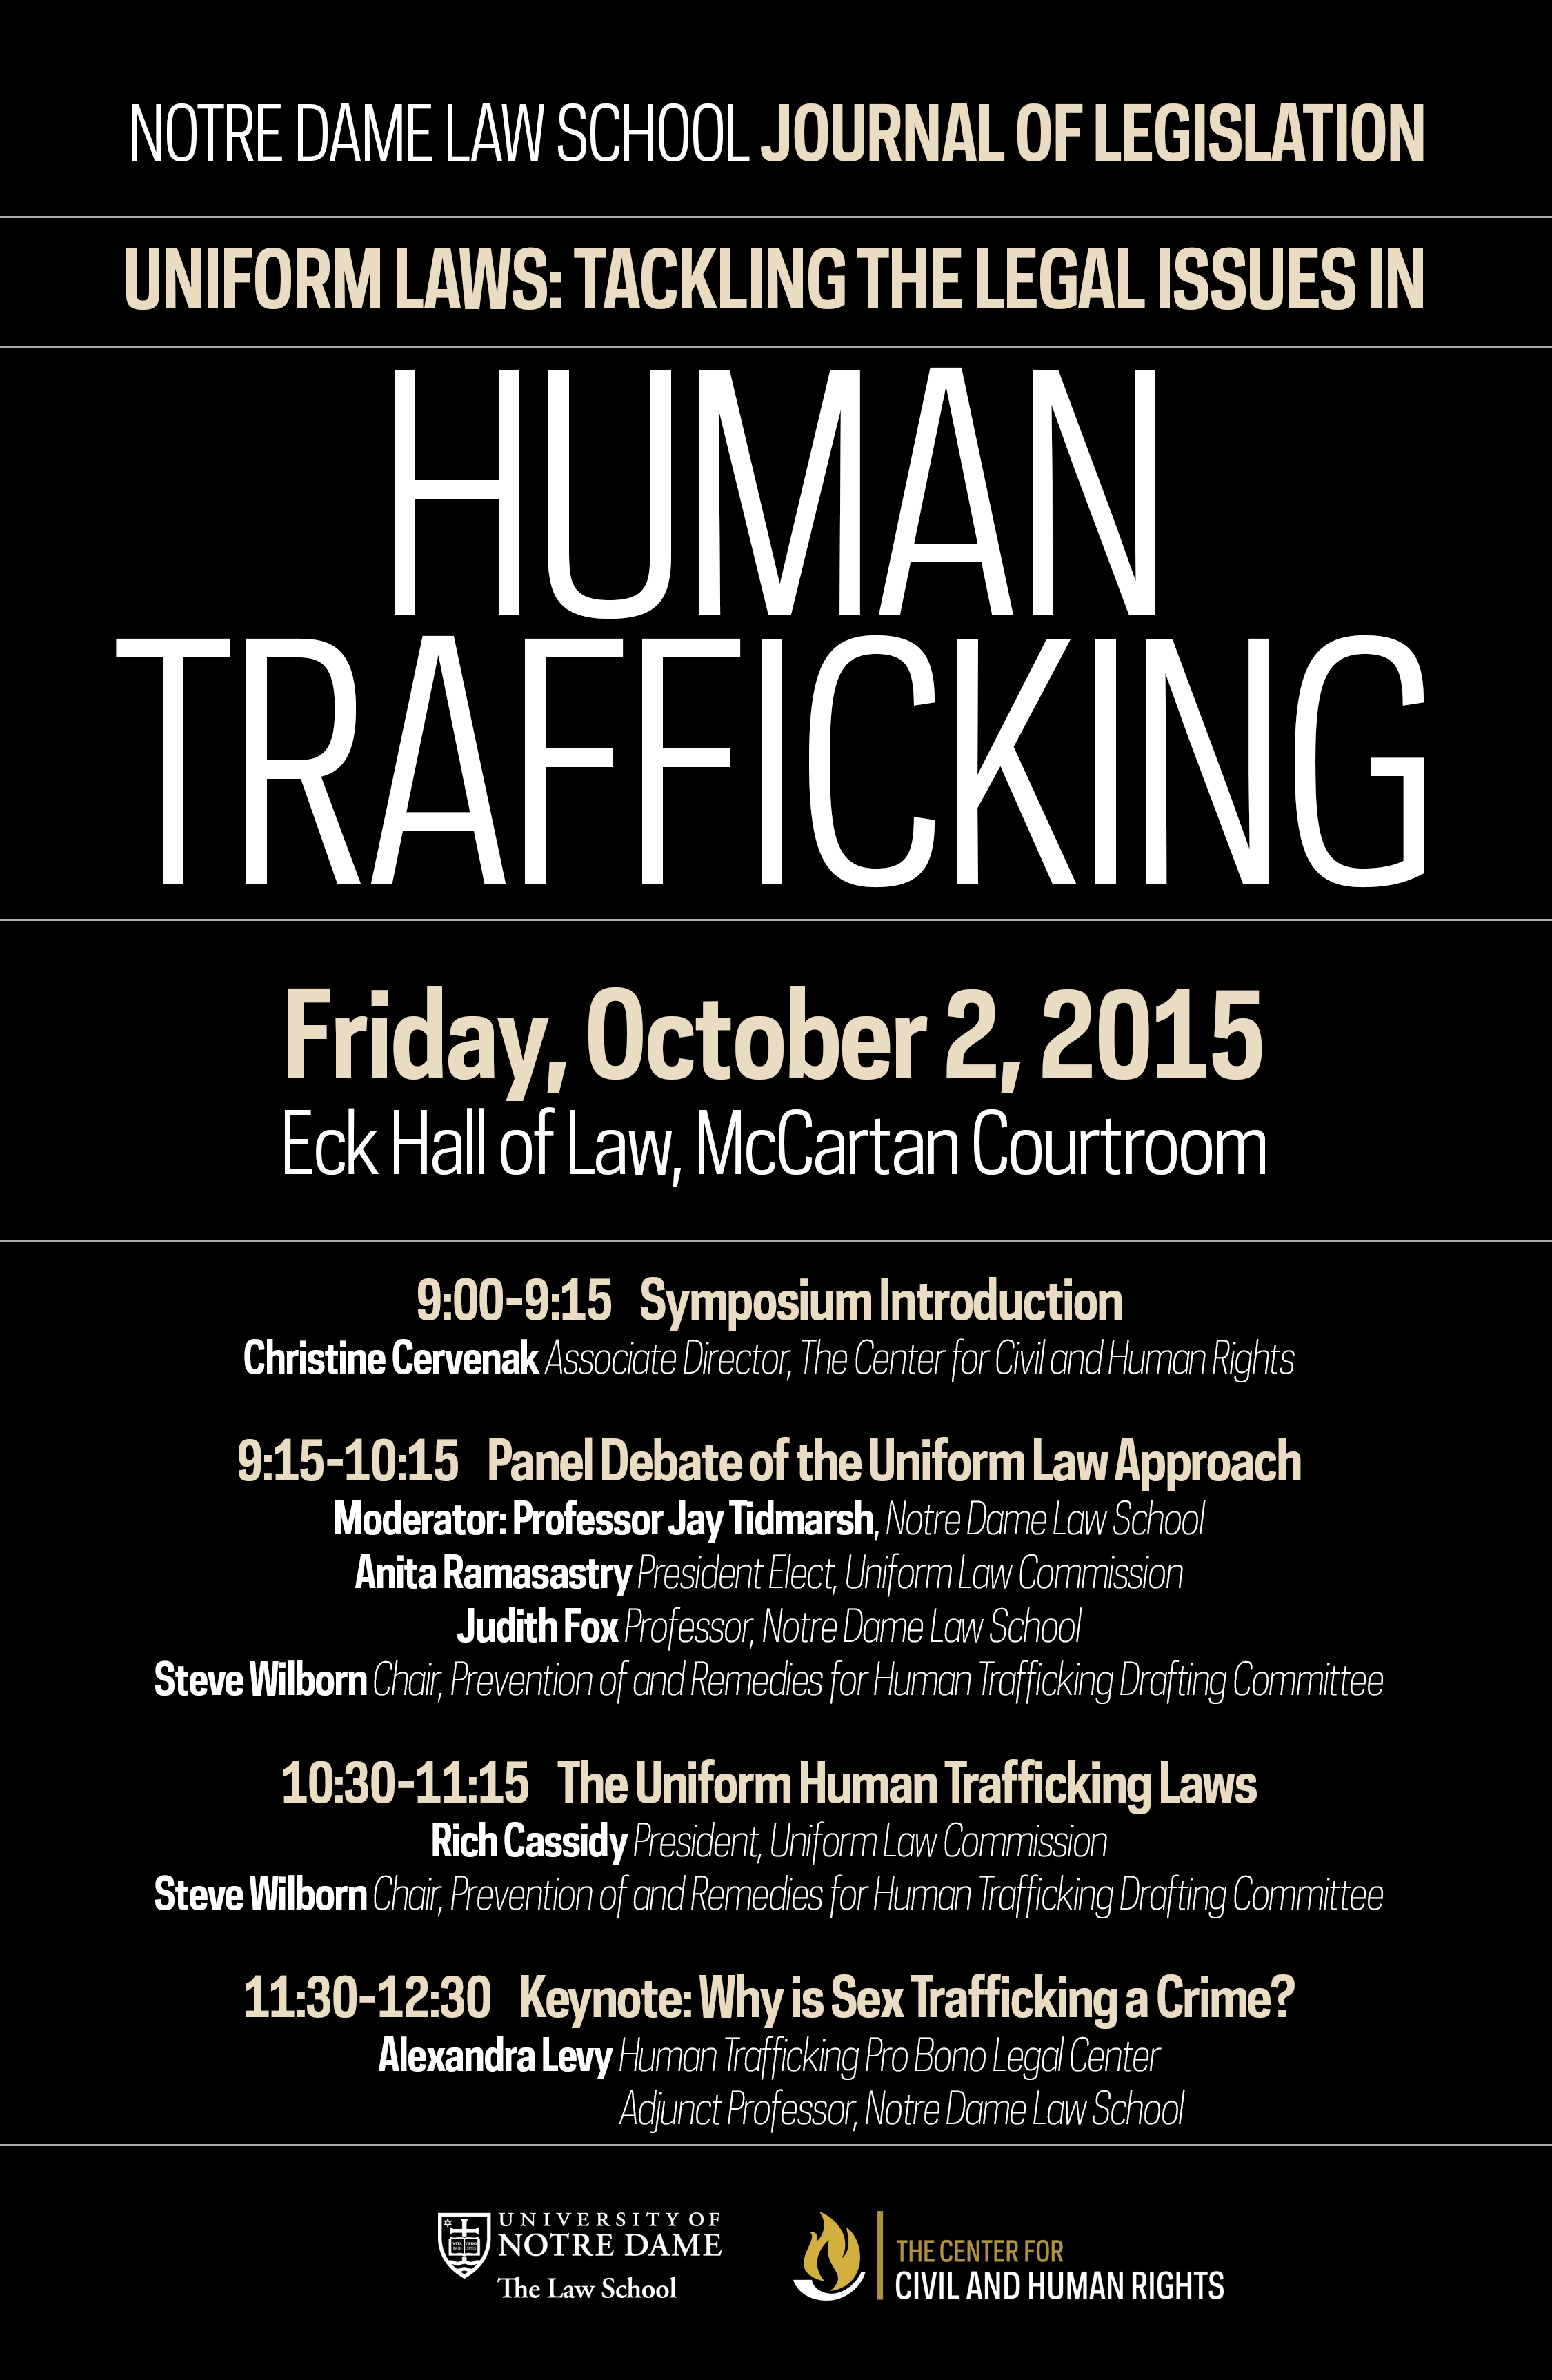 2015 - Uniform Laws:Tackling the Legal Issues in Human Trafficking